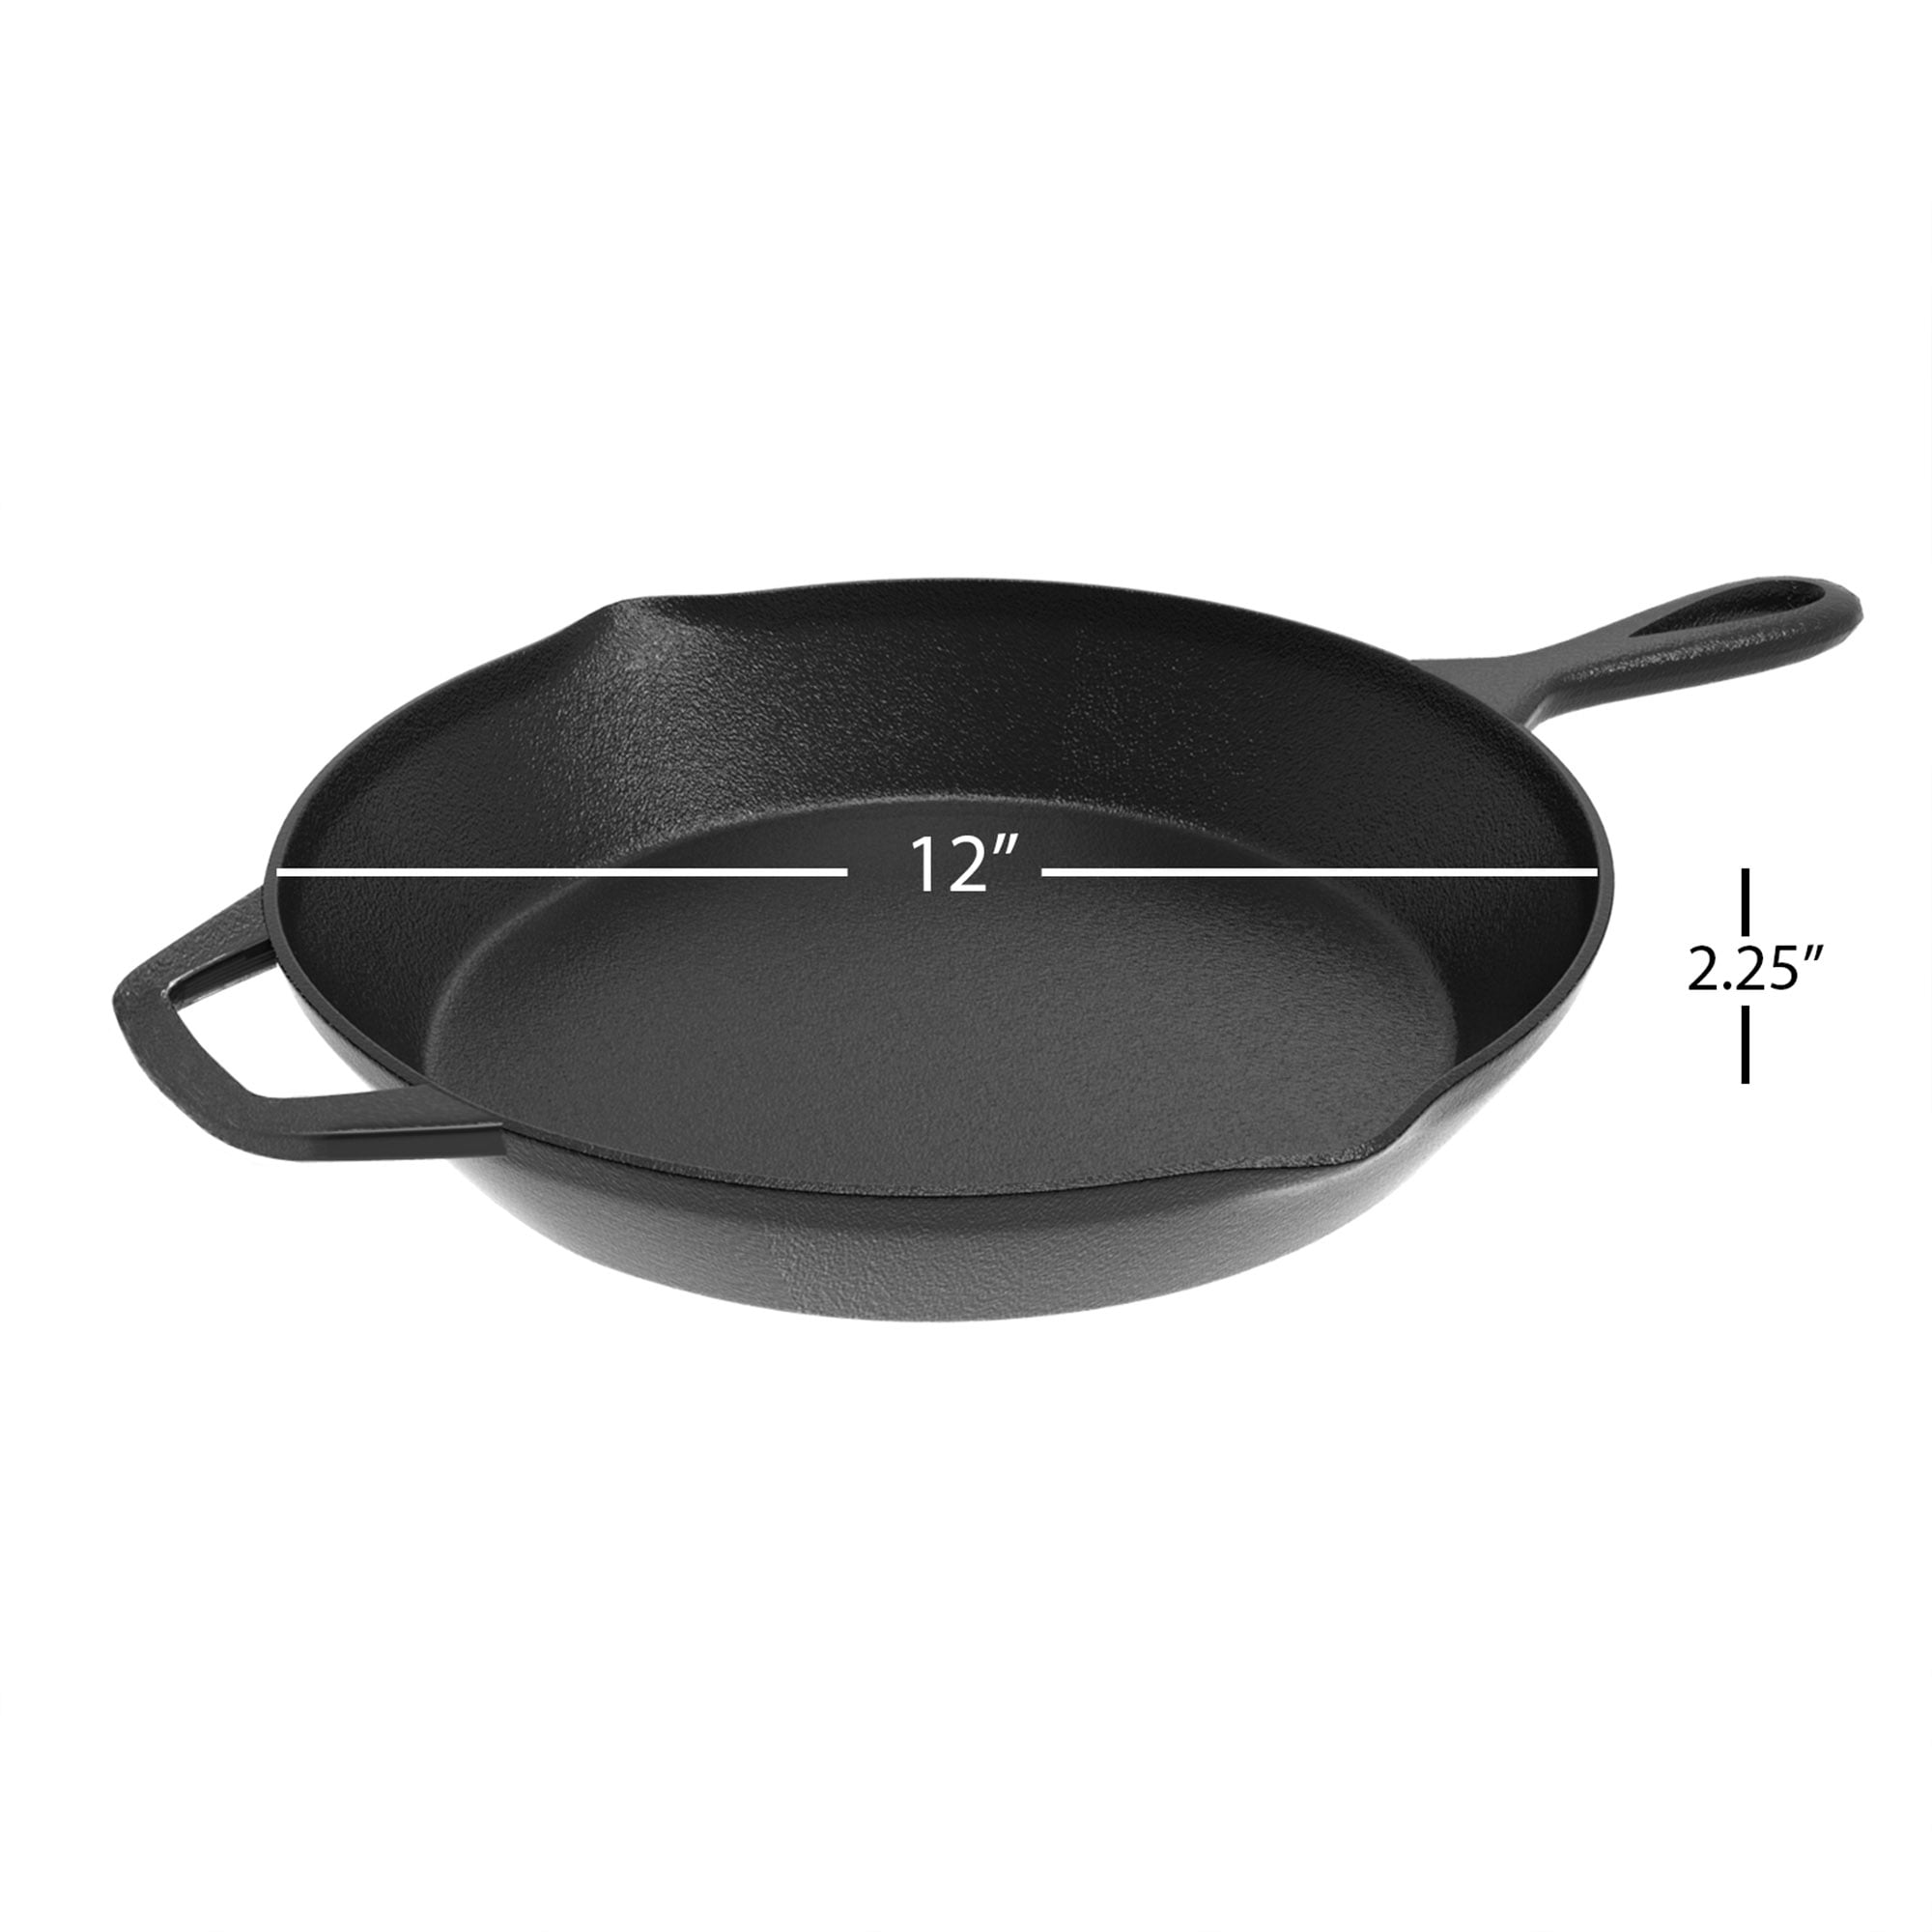 2 Piece 12 inch Cast Iron Skillet Set camping camping kitchen